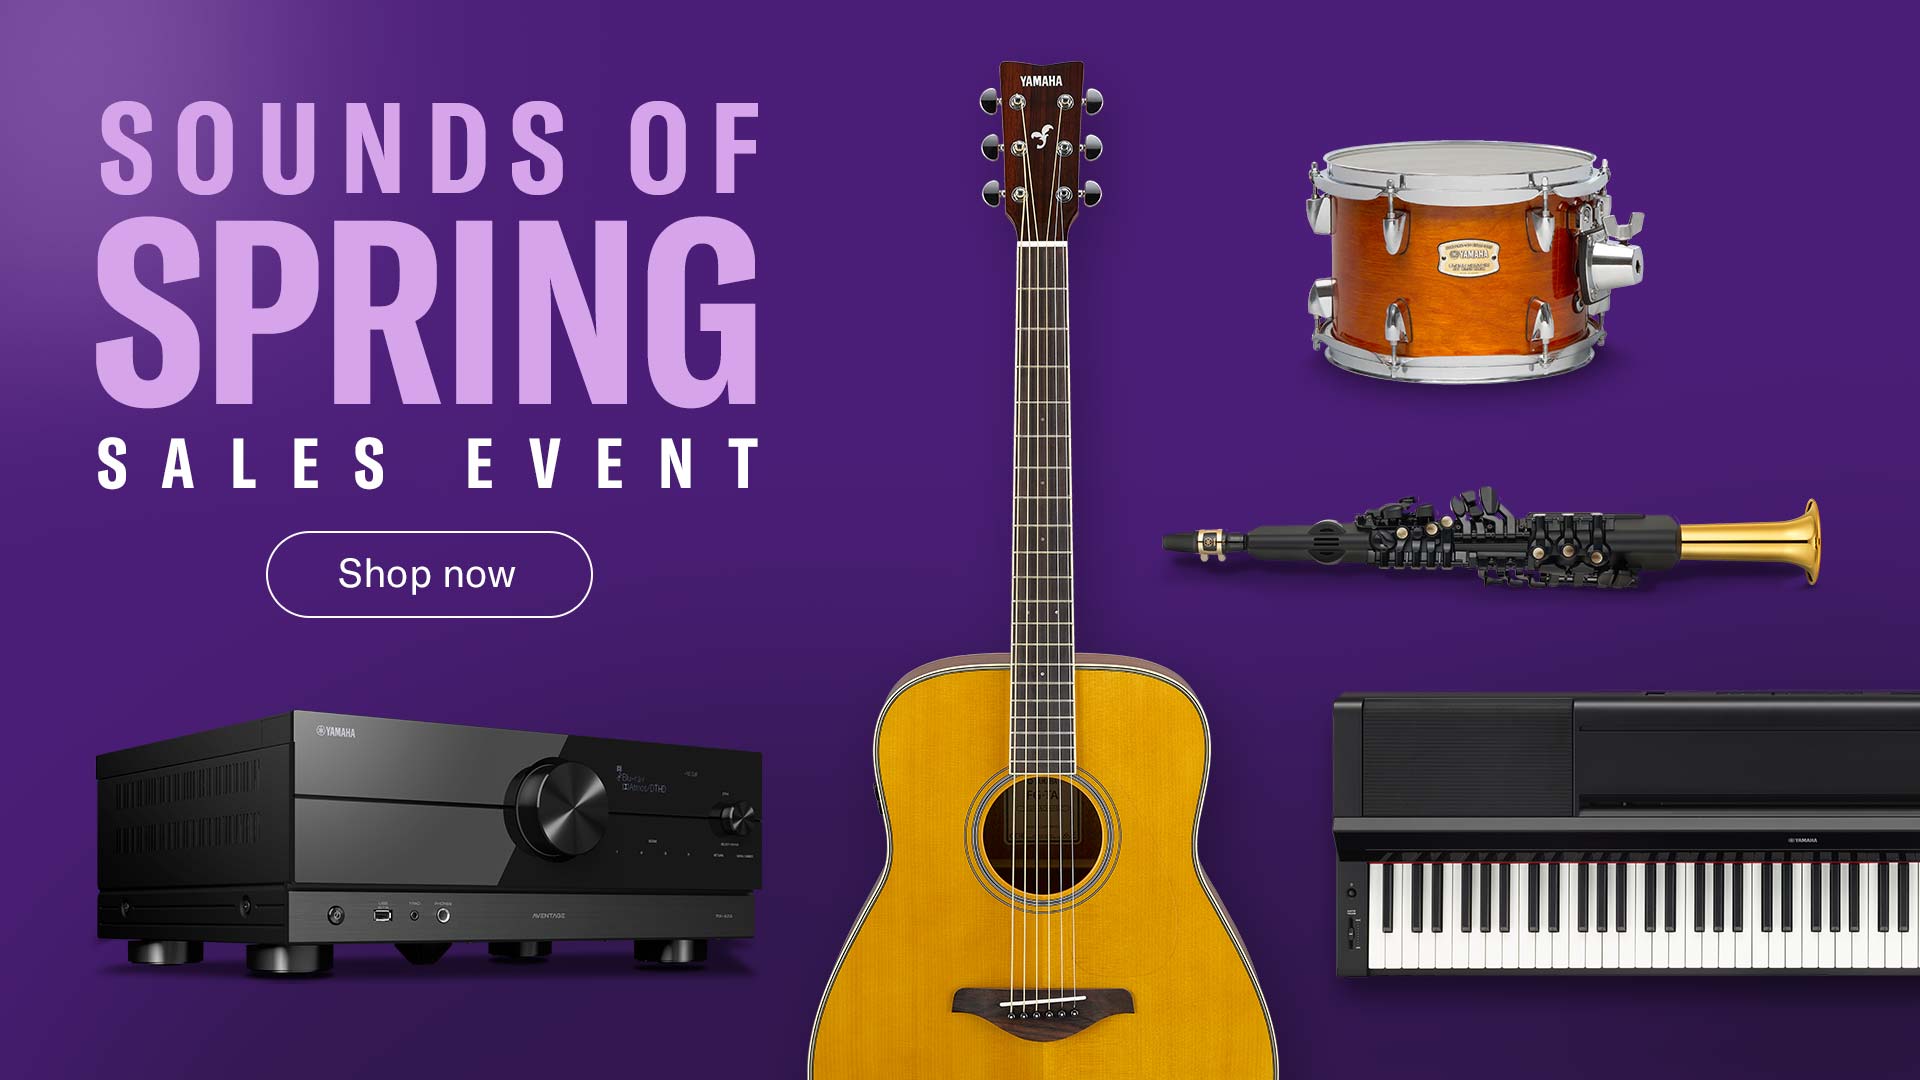 banner image showing various yamaha products like av receiver, guitar, keyboard, snare drum and flute